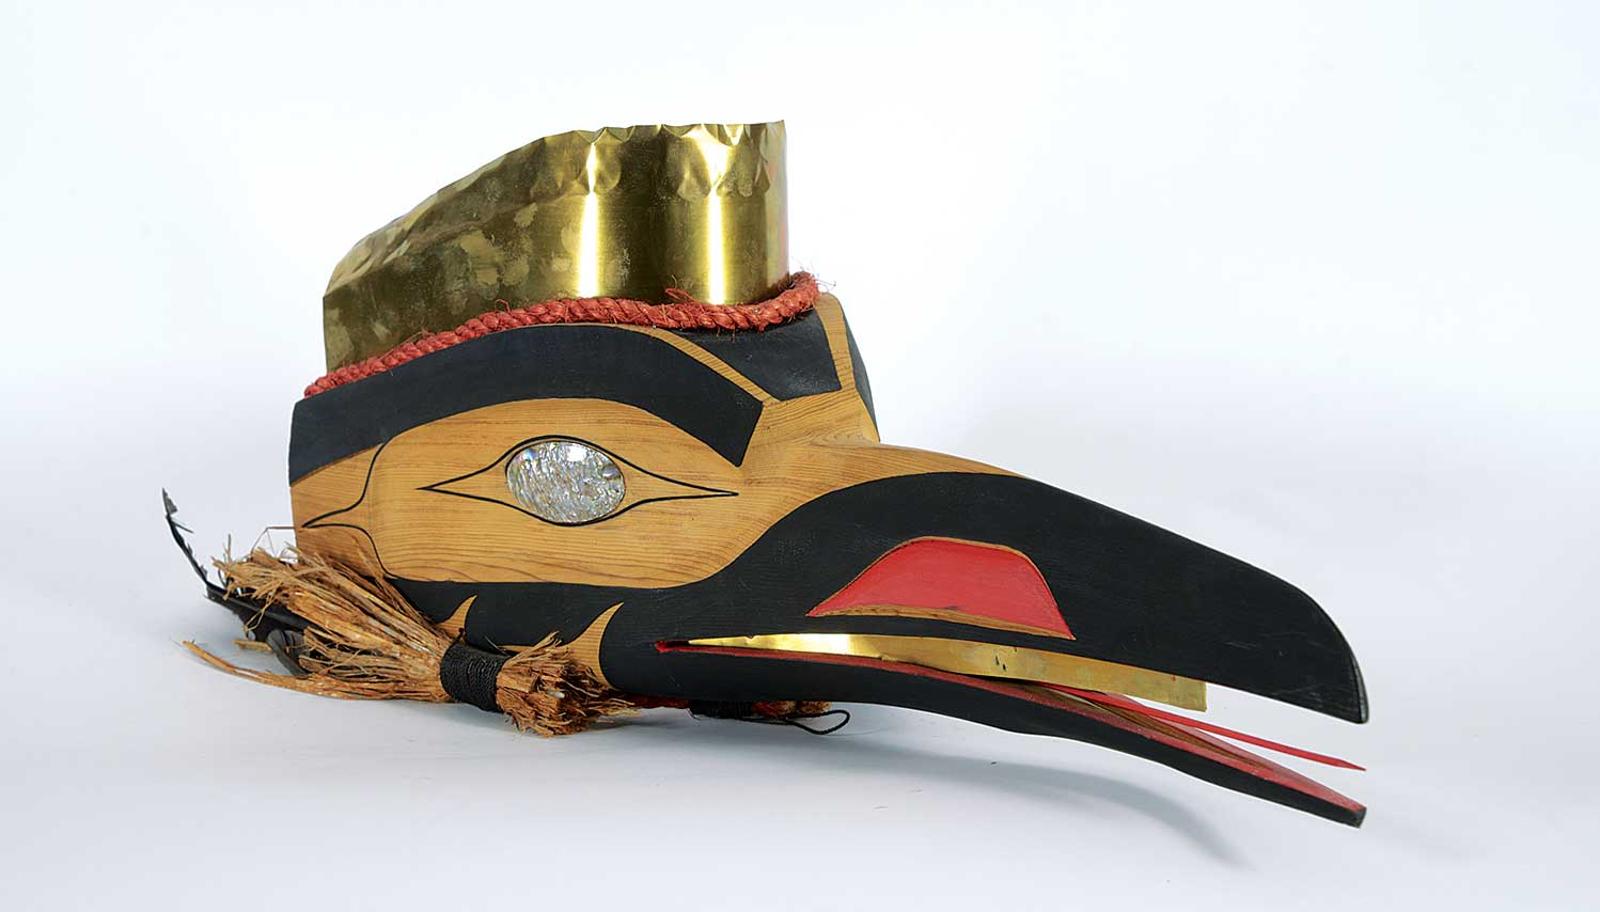 Patrick Amiot (1960) - Mosquito with Abalone Inlay and Brass Mask